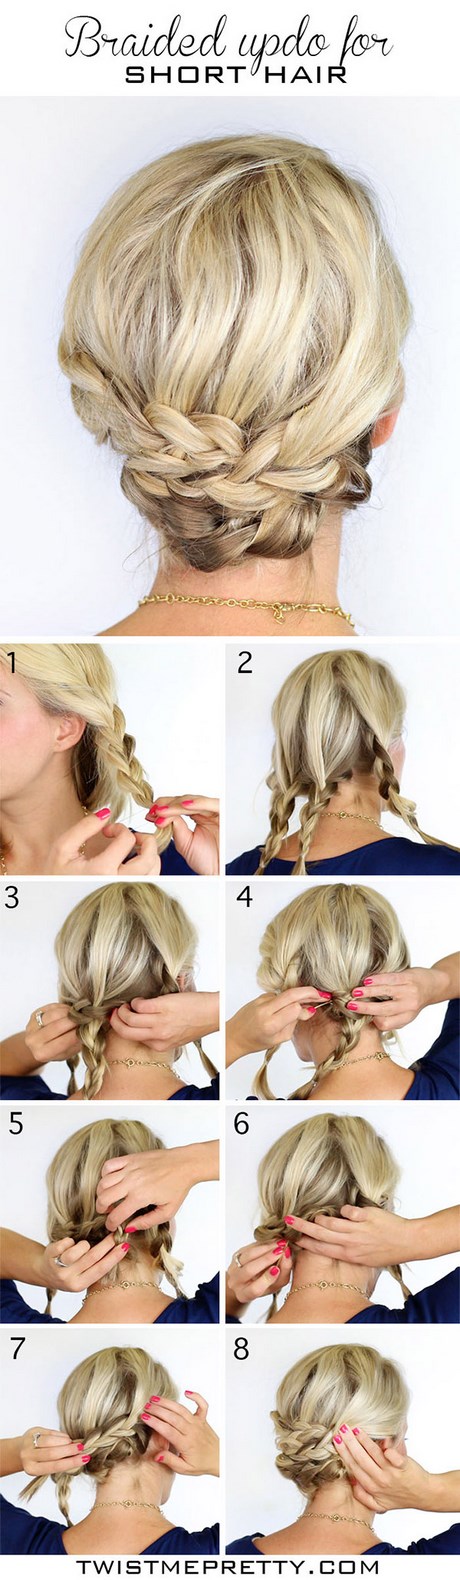 Easy put up hairstyles for long hair easy-put-up-hairstyles-for-long-hair-27_15